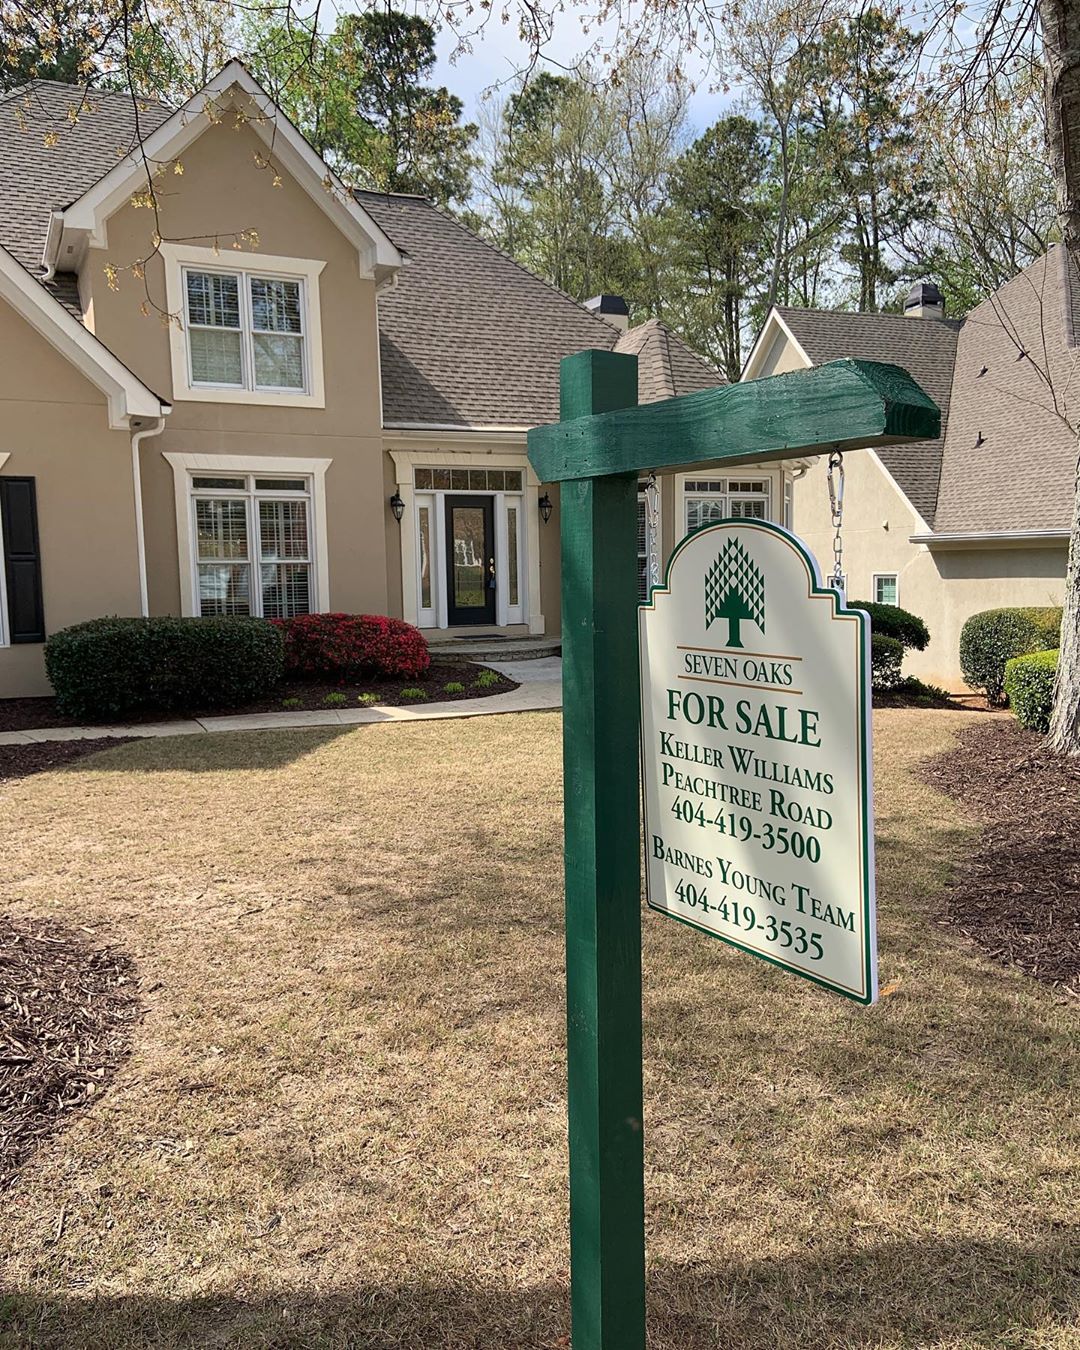 home ready for sale with for sale sign in front yard photo by Instagram user @image360.alpharetta